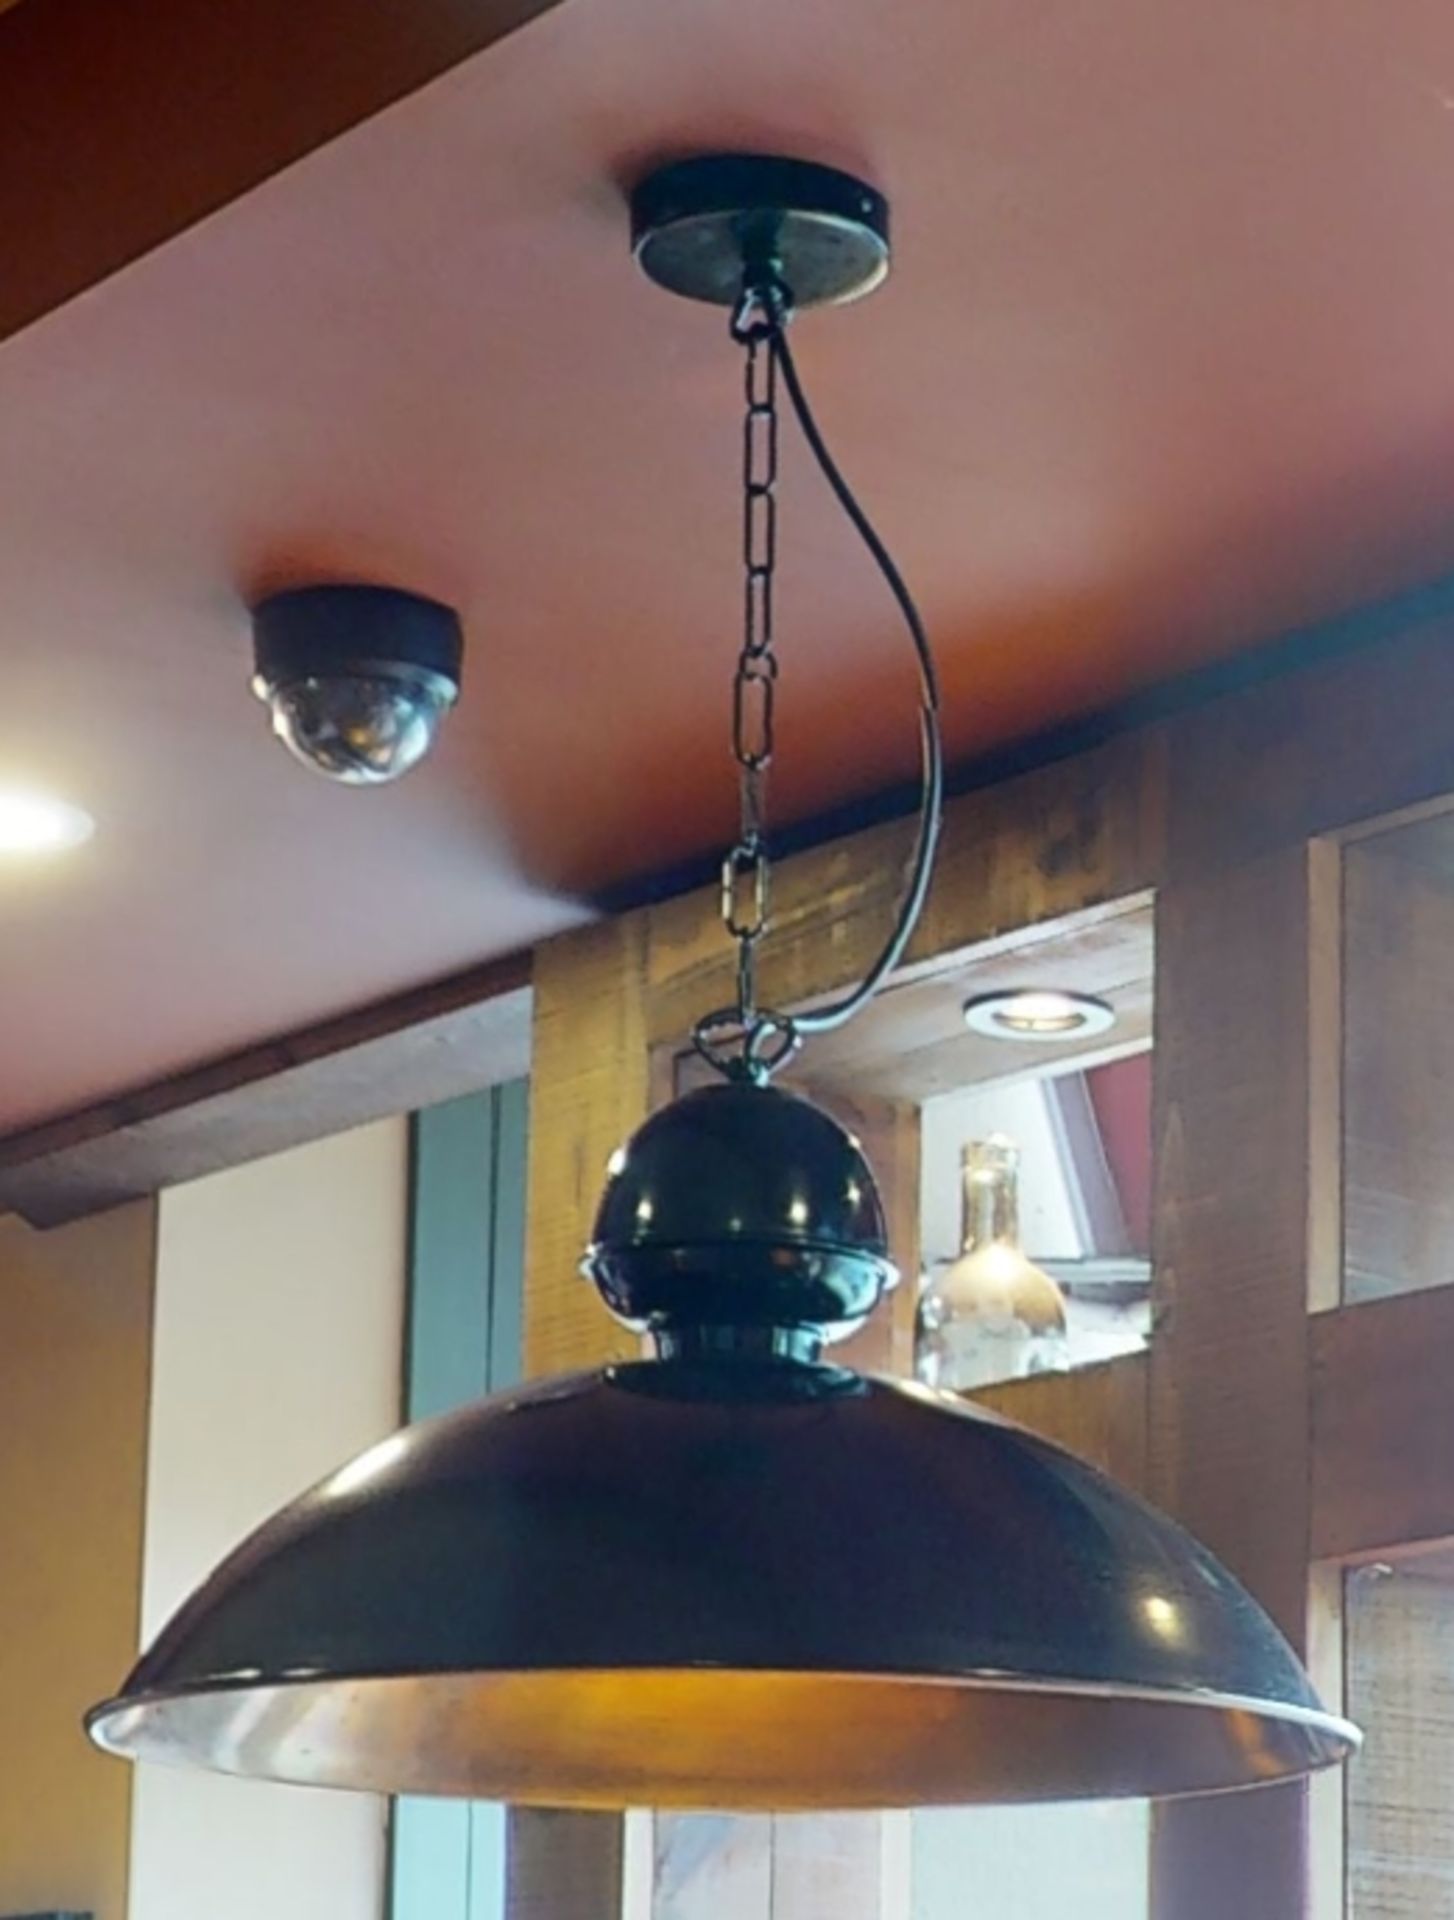 6 x Industrial Style Black Ceiling Pendant Dome Lights - Black Finish With Coloured Inner - Short - Image 9 of 9